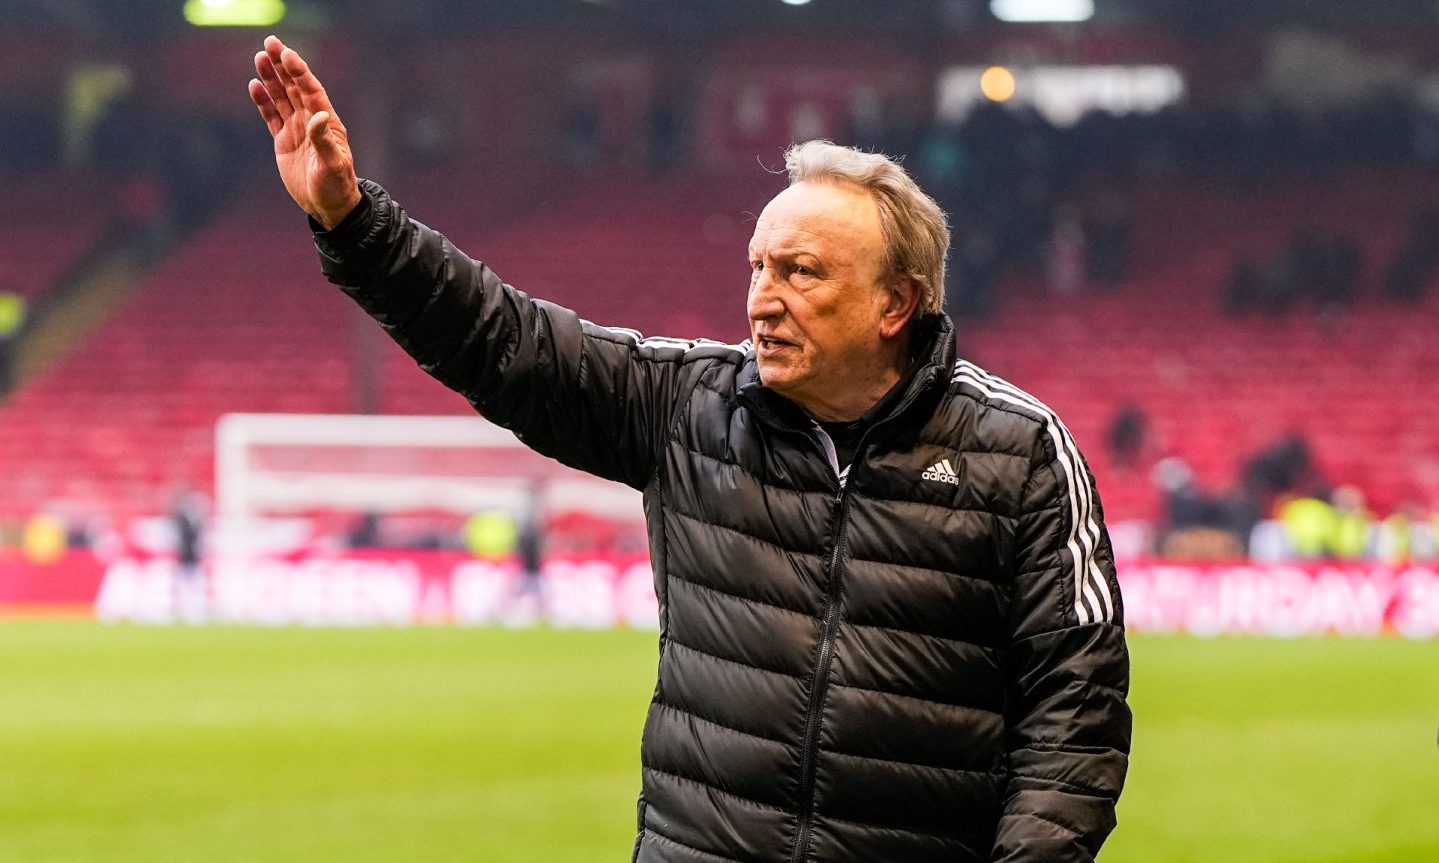 Aberdeen manager Neil Warnock waves to the fans as he walks off the pitch at full-time after beating Kilmarnock.